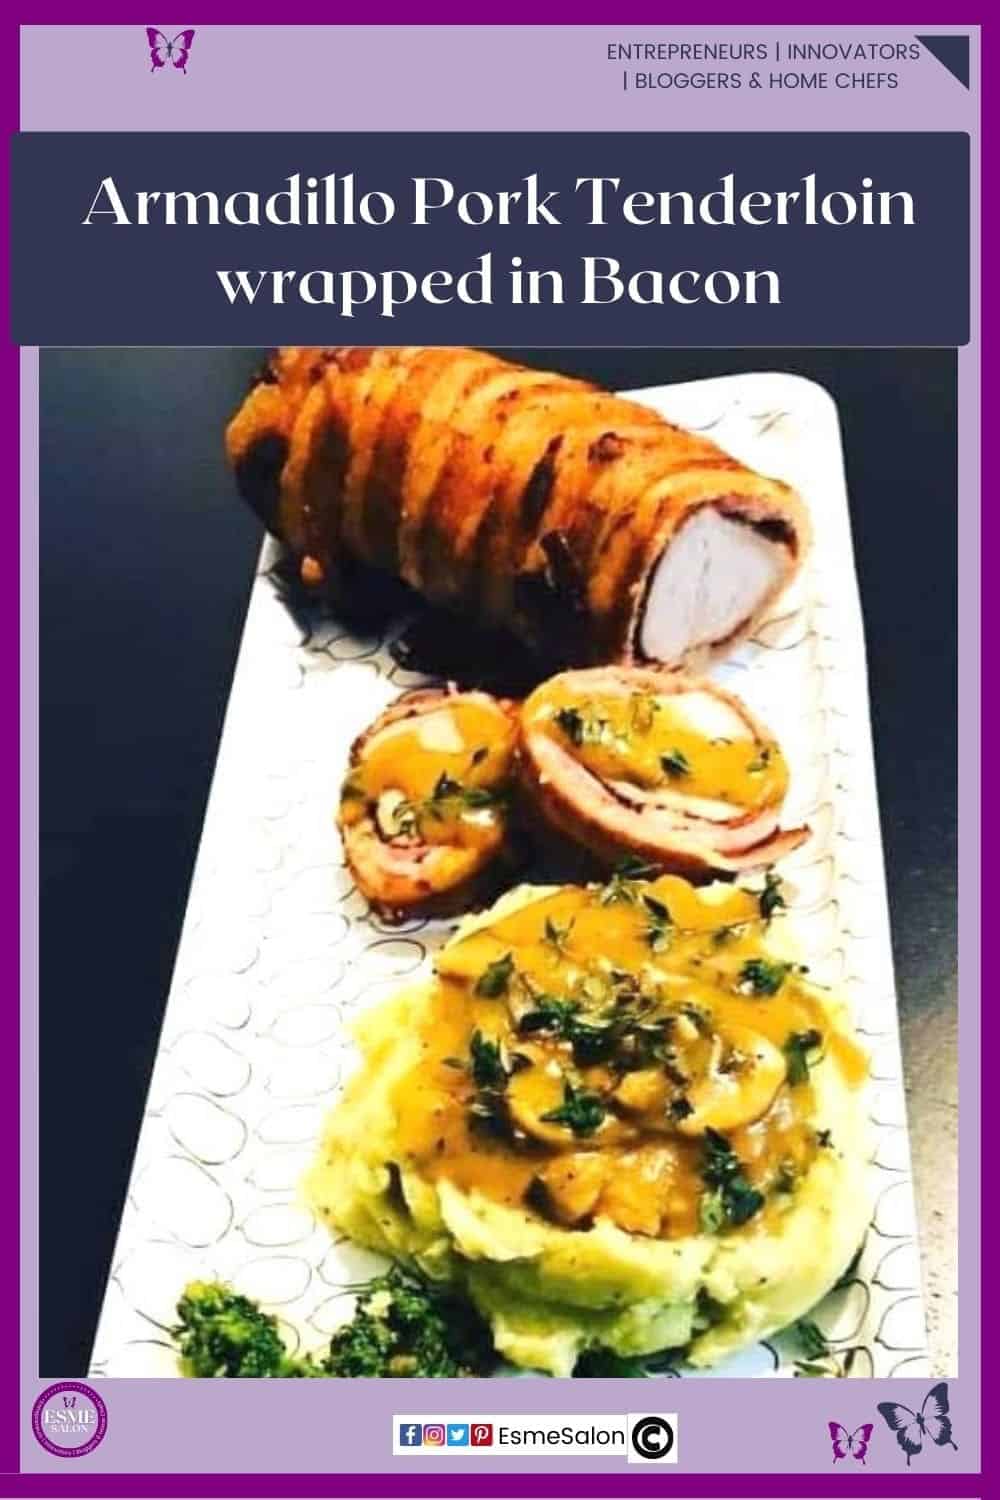 an image of a Pork Tenderloin wrapped in Bacon on a white platter sliced and served with herbed Mushroom Gravy